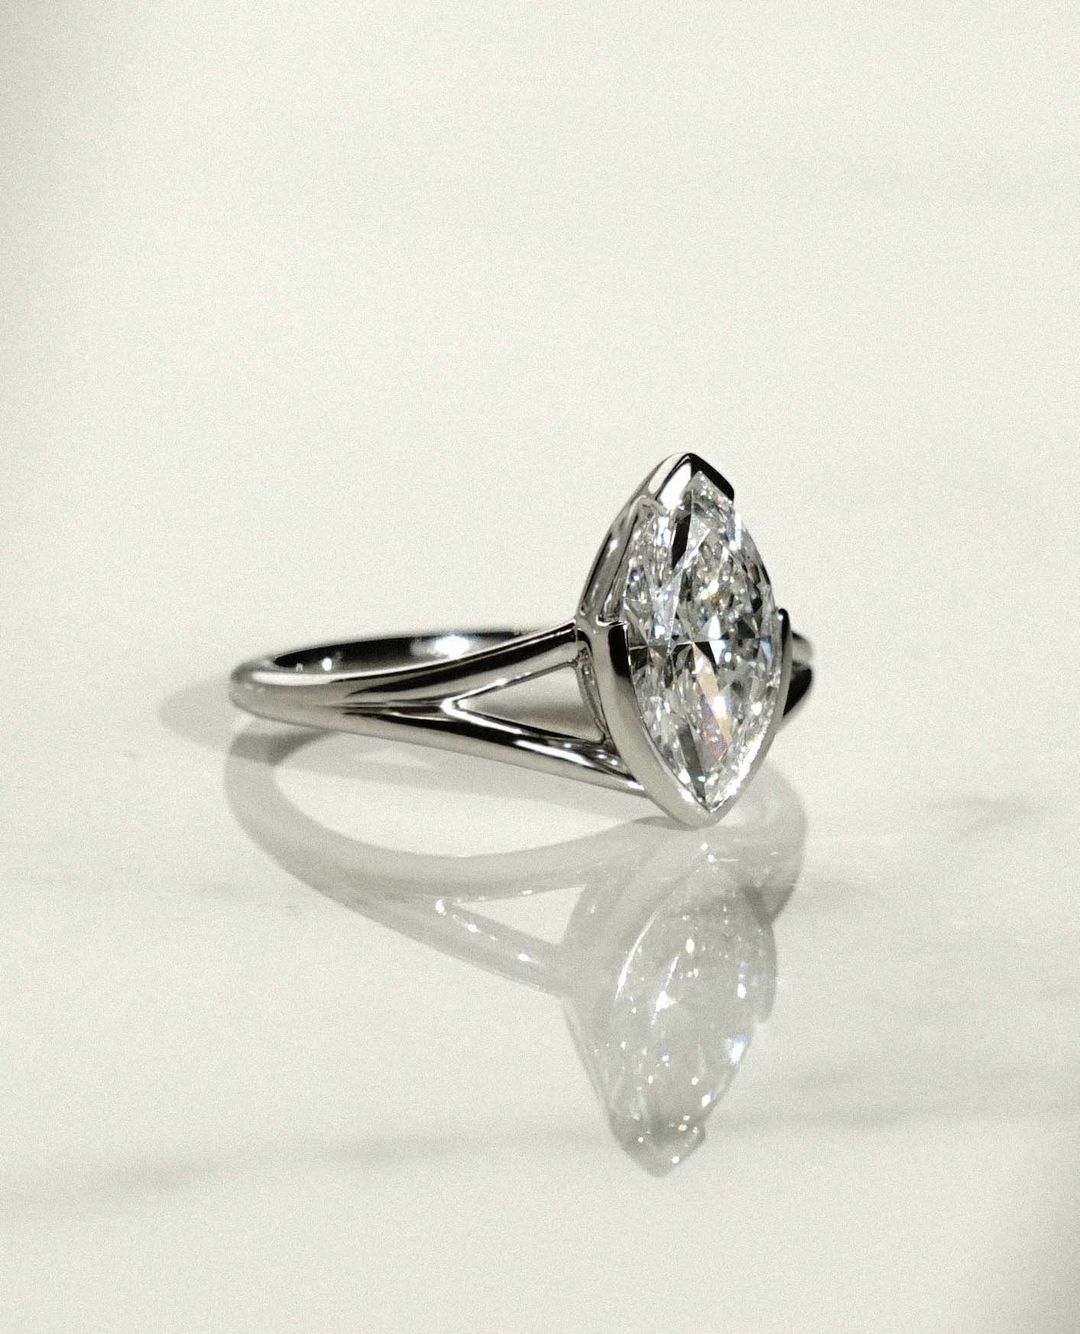 2.4Ct White Marquise Cut Half Bezel Ring | Birthday Gift Ring For Her | Unique Ring | Timeless Design